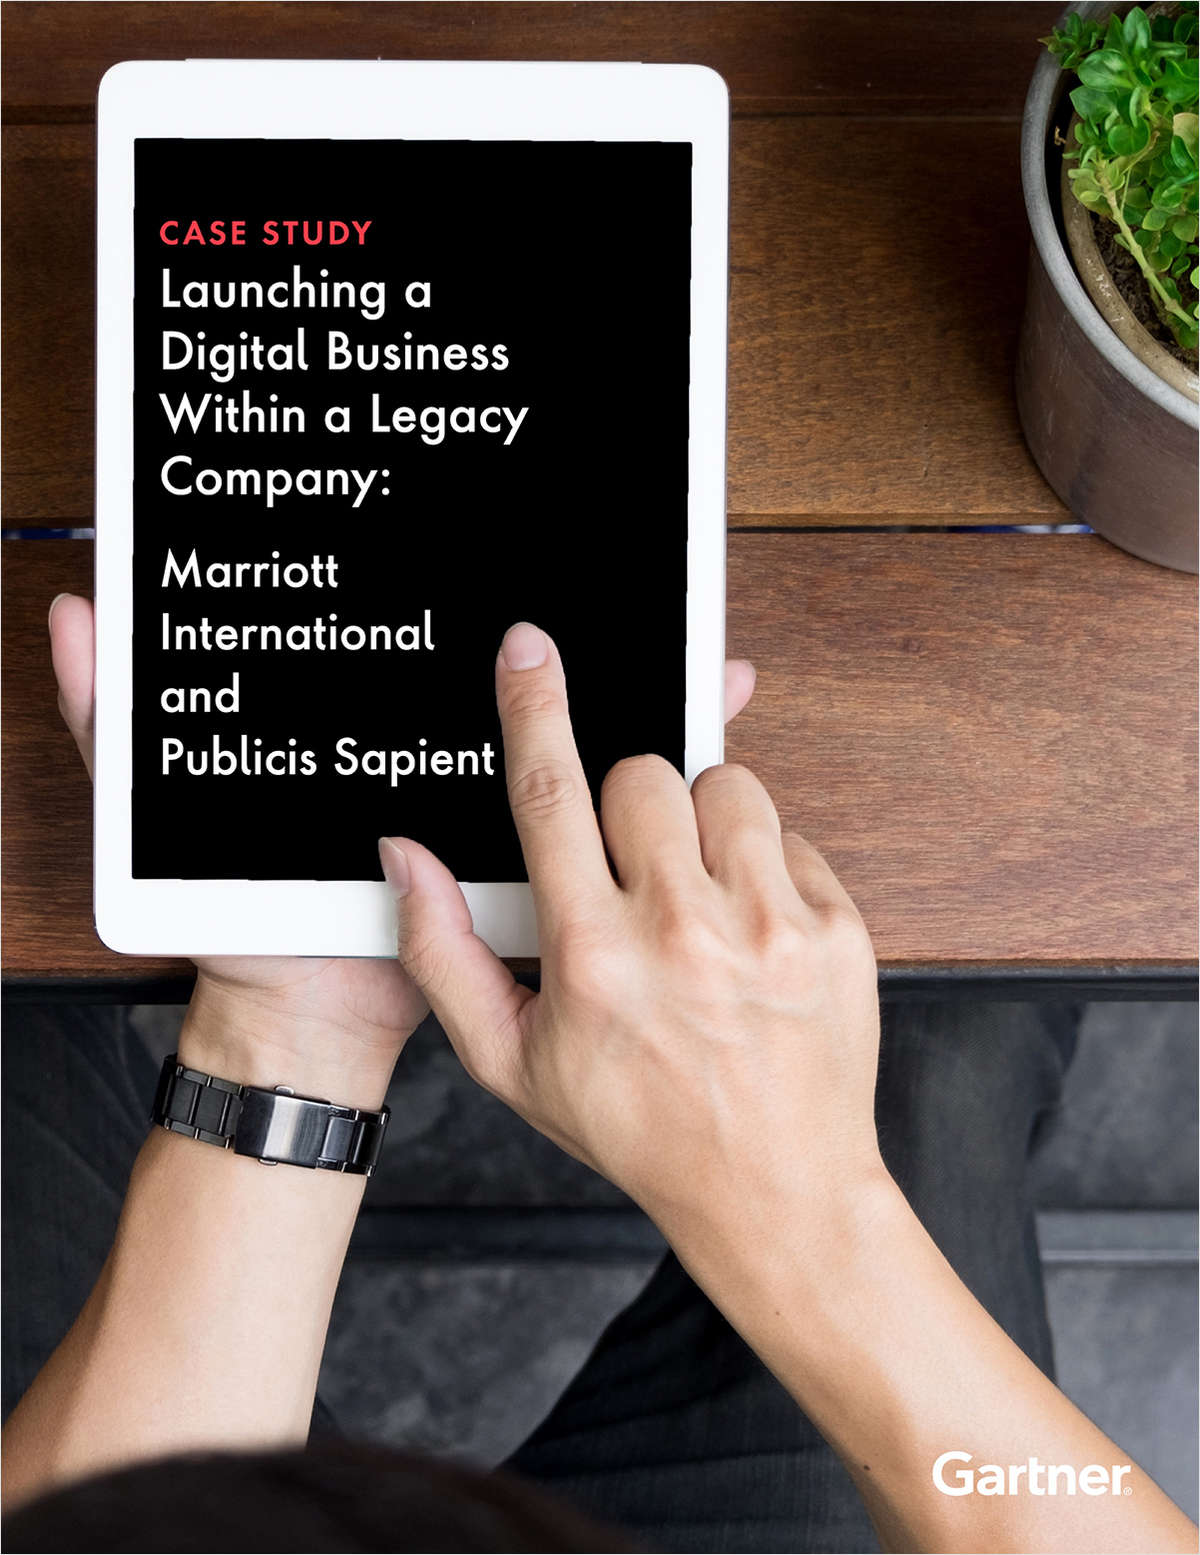 Case Study Report: Launching a Digital Business Within a Legacy Company: Marriott International and Publicis Sapient